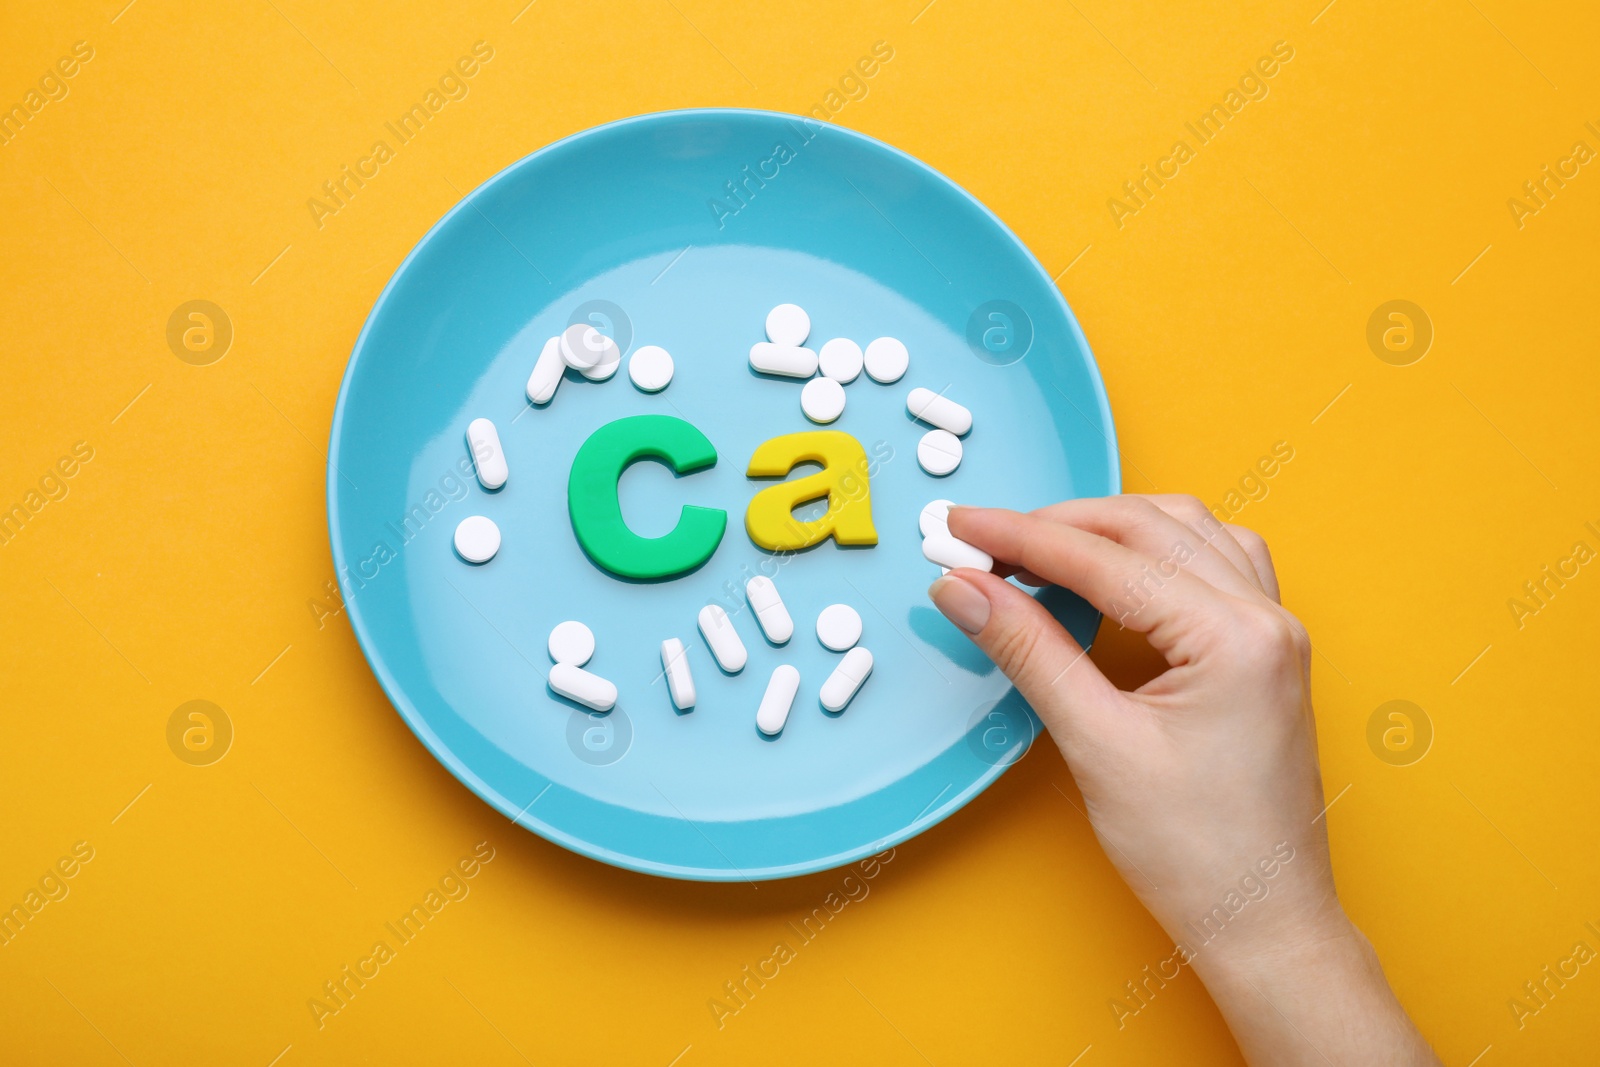 Photo of Woman, plate with pills and calcium symbol made of colorful letters on orange background, top view